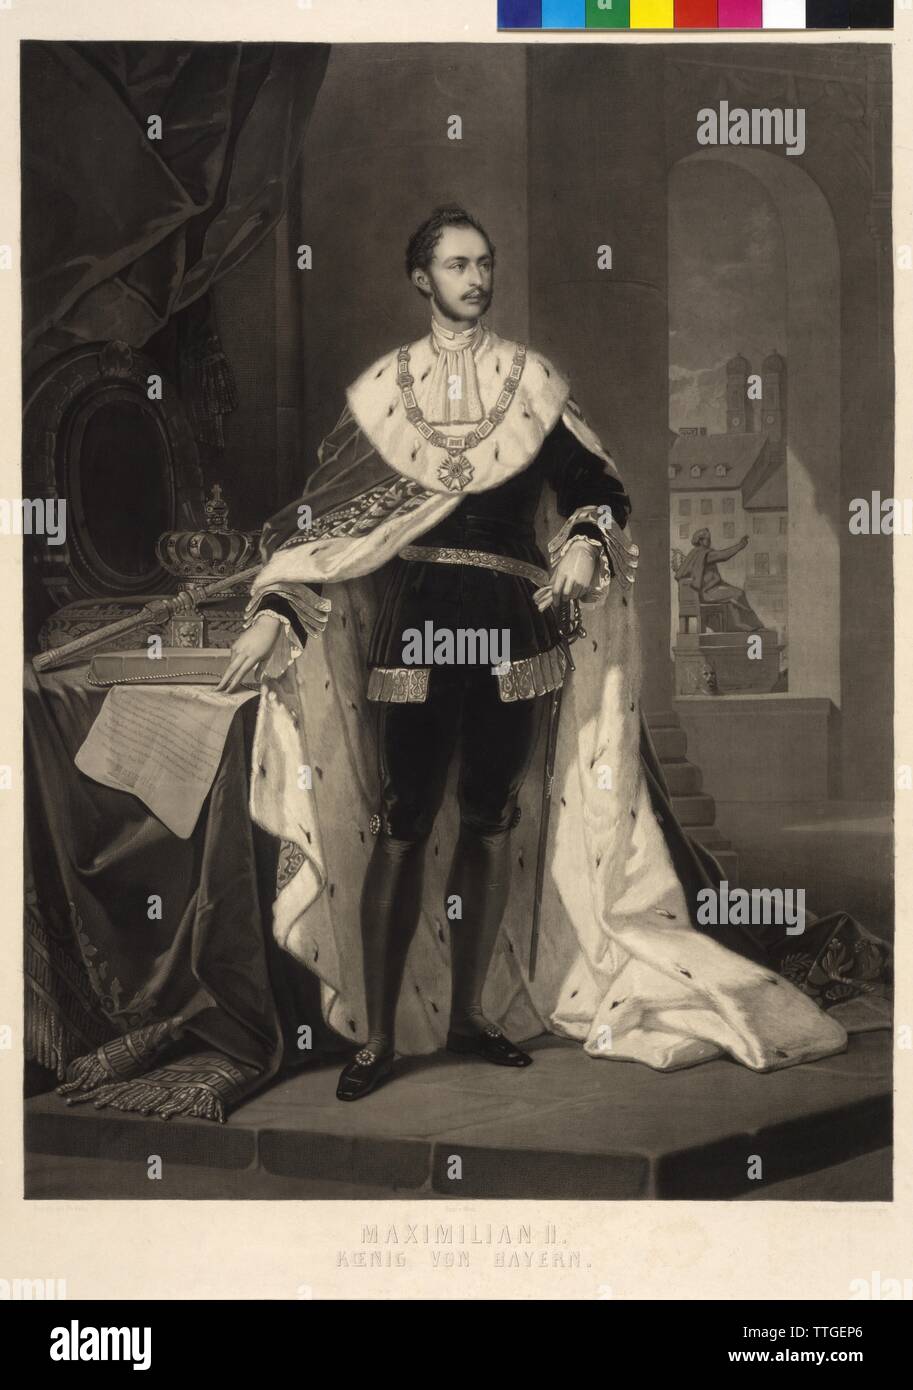 Maximilian II King of Bavaria, Ink wash electroplating by Leo Schoeninger based on a painting by Philipp von Foltz, Additional-Rights-Clearance-Info-Not-Available Stock Photo